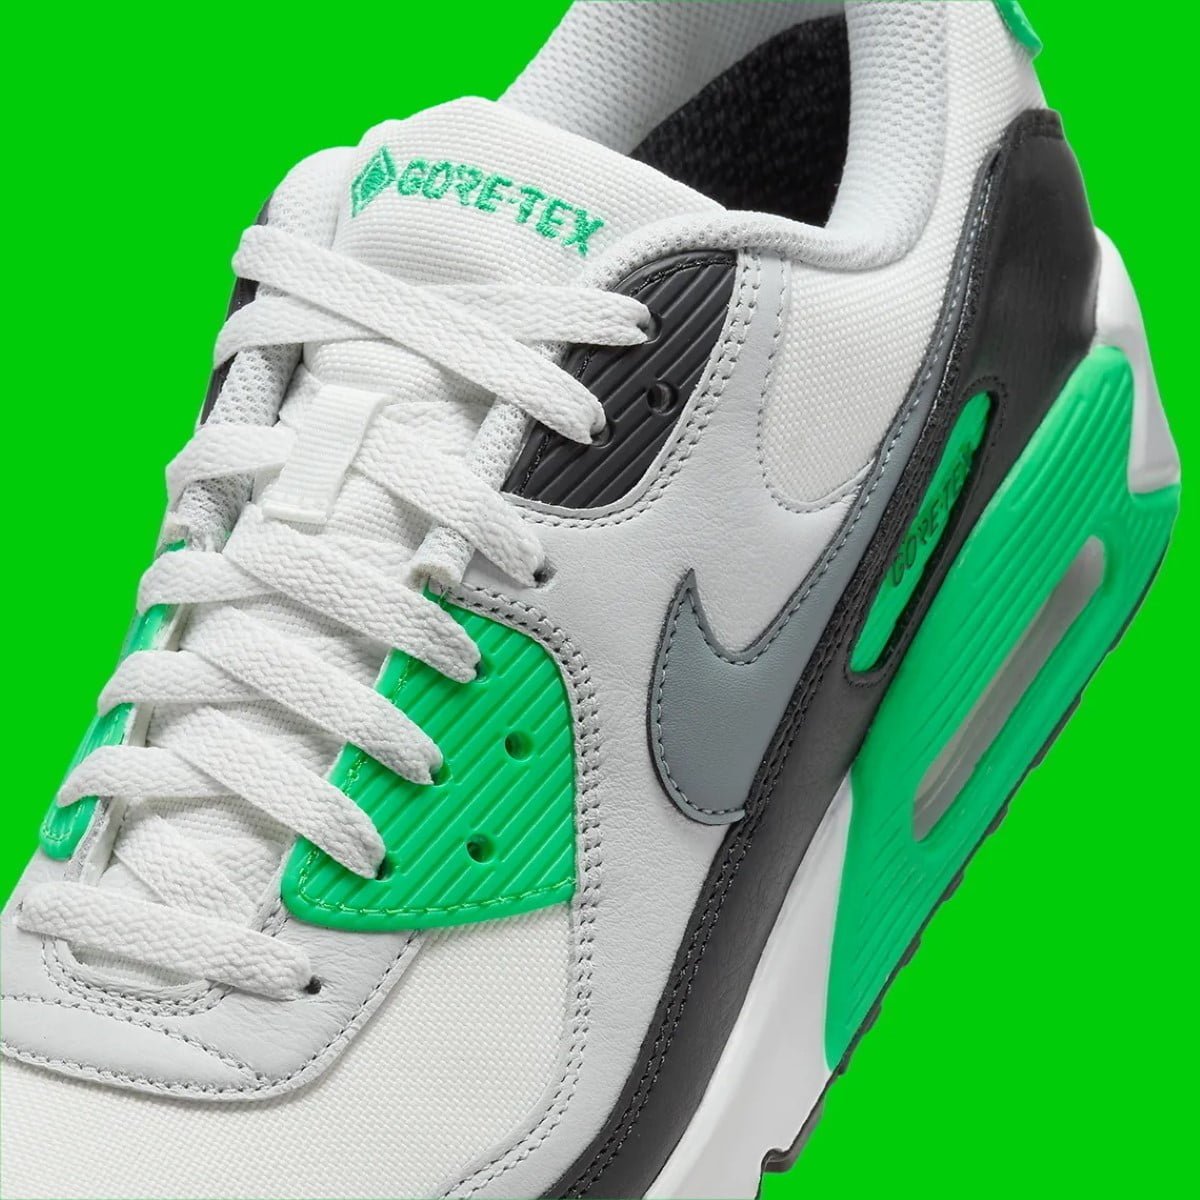 Nike Air Max 90 Expands GORE-TEX Collection with New "Scream Green" Colorway